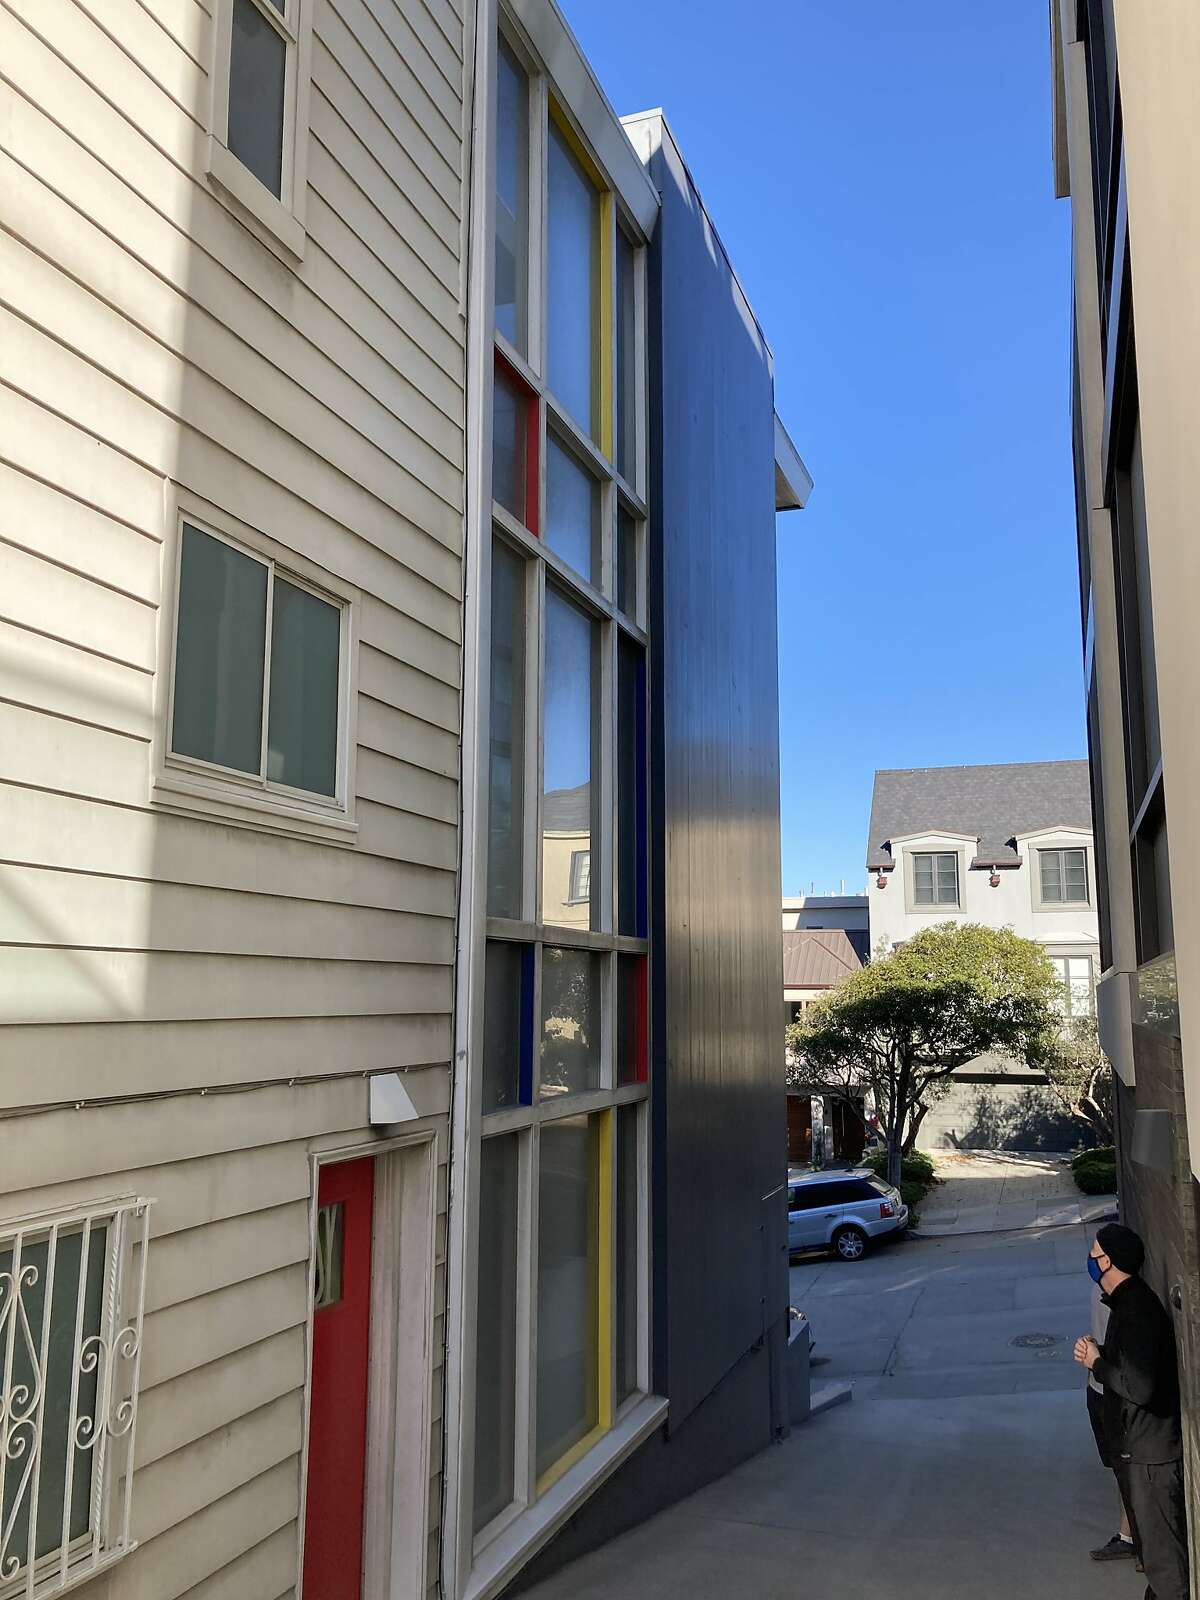 Writer, poet and record producer David Breskin's house on Russian Hill in San Francisco features a three-story window painted in Mondrian style and colors.